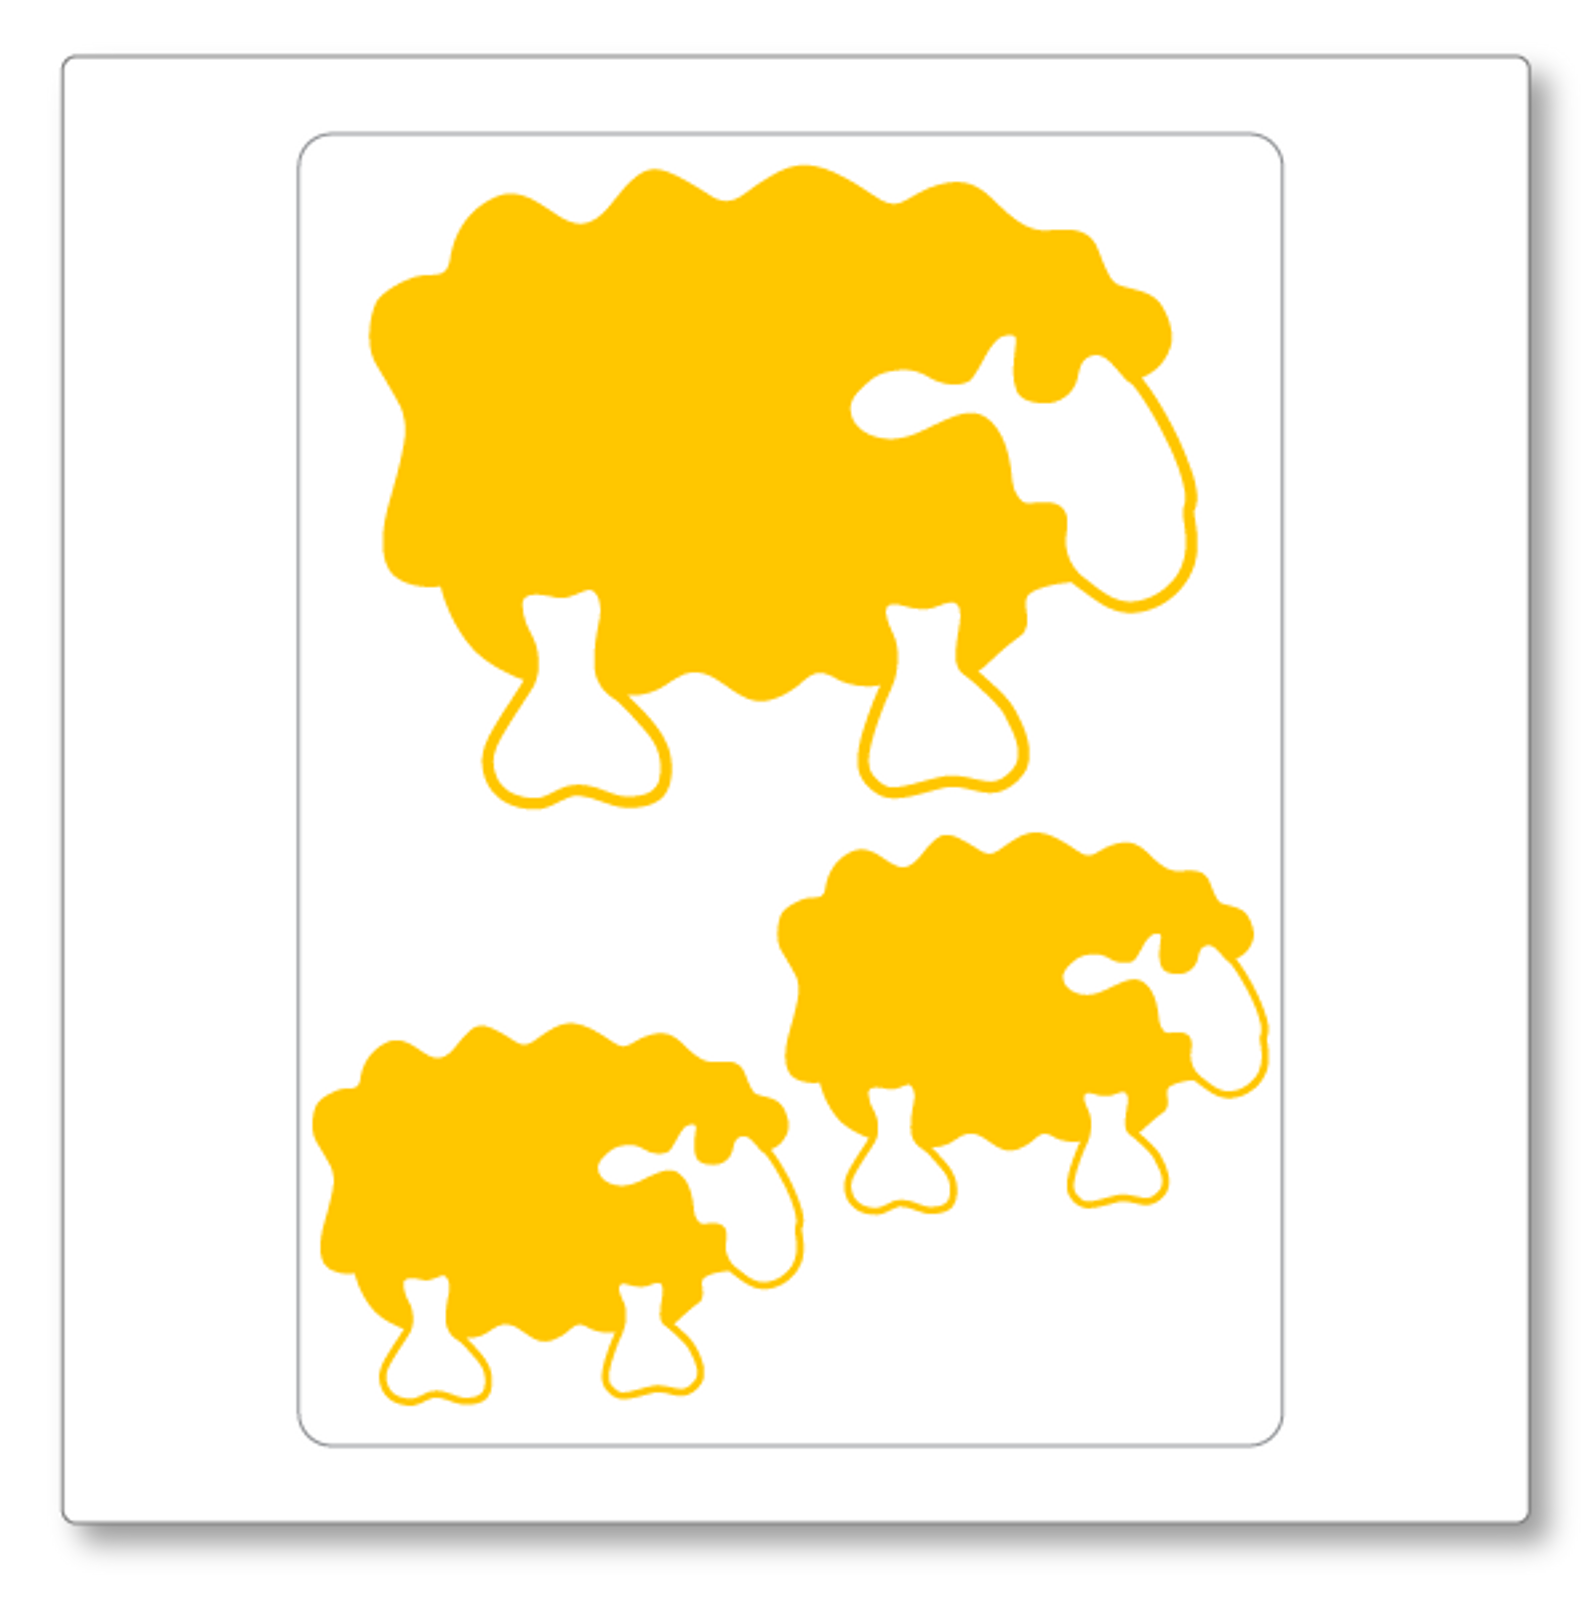 Our fluffy sheep wall decal contains three sheep, two small and one larger. Shown in yellow on white.